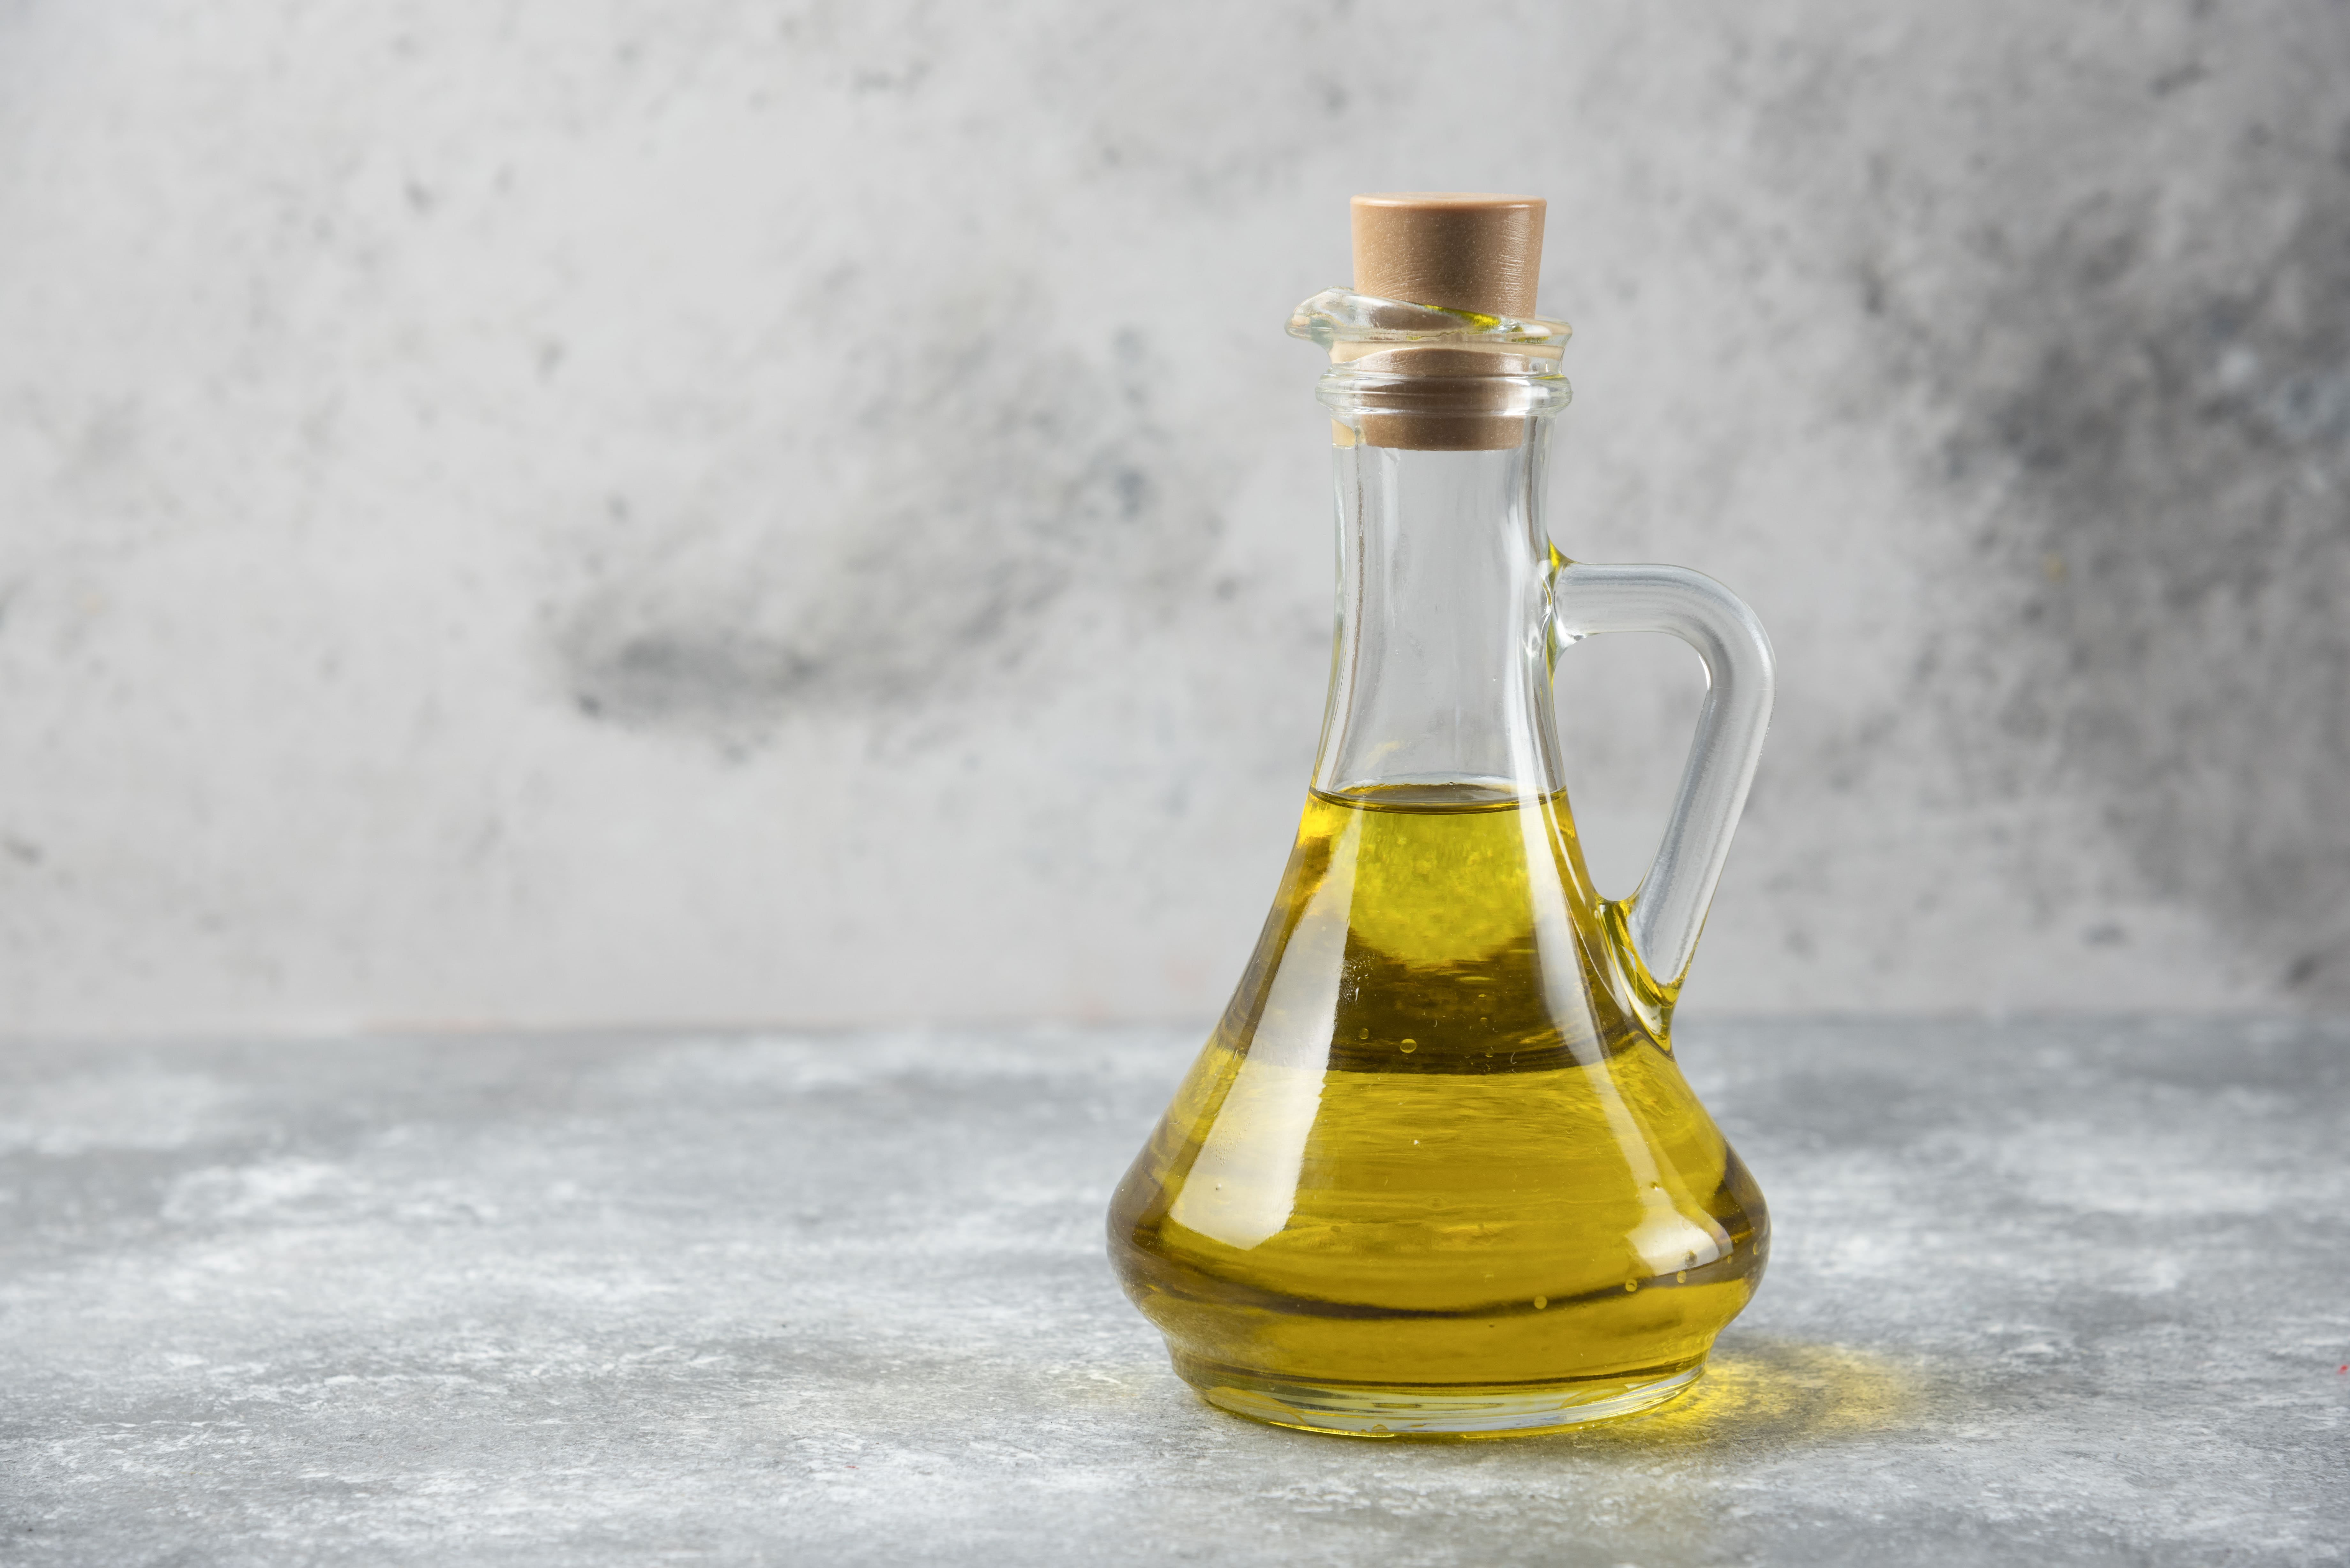 Cooking Oil product suppliers in india, Cooking Oil suppliers in india, Cooking Oil suppliers in india, Aaditya Traders, Cooking Oil suppliers in india